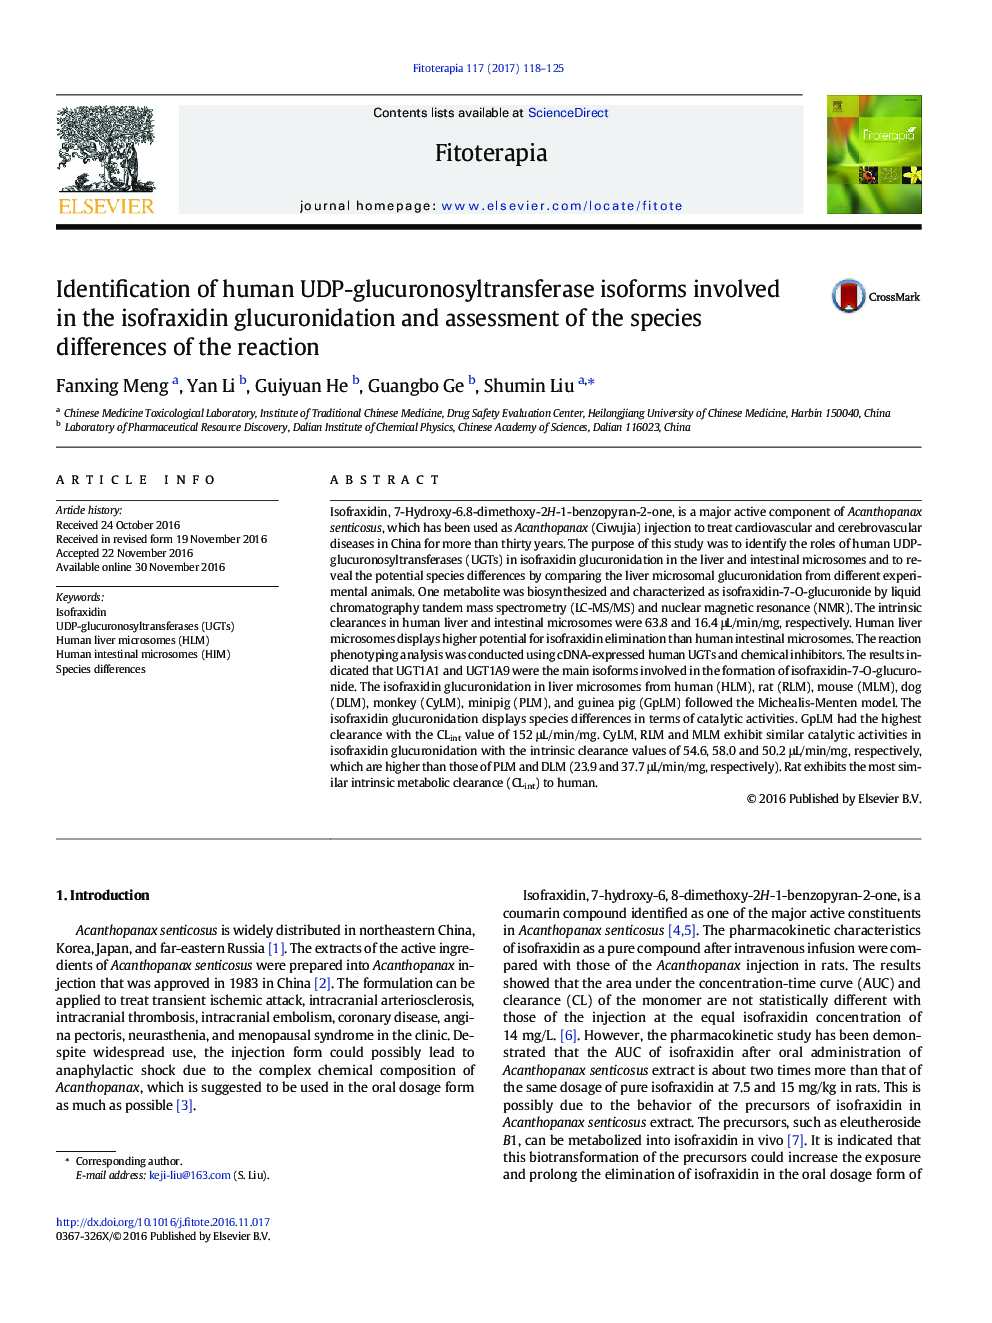 Identification of human UDP-glucuronosyltransferase isoforms involved in the isofraxidin glucuronidation and assessment of the species differences of the reaction